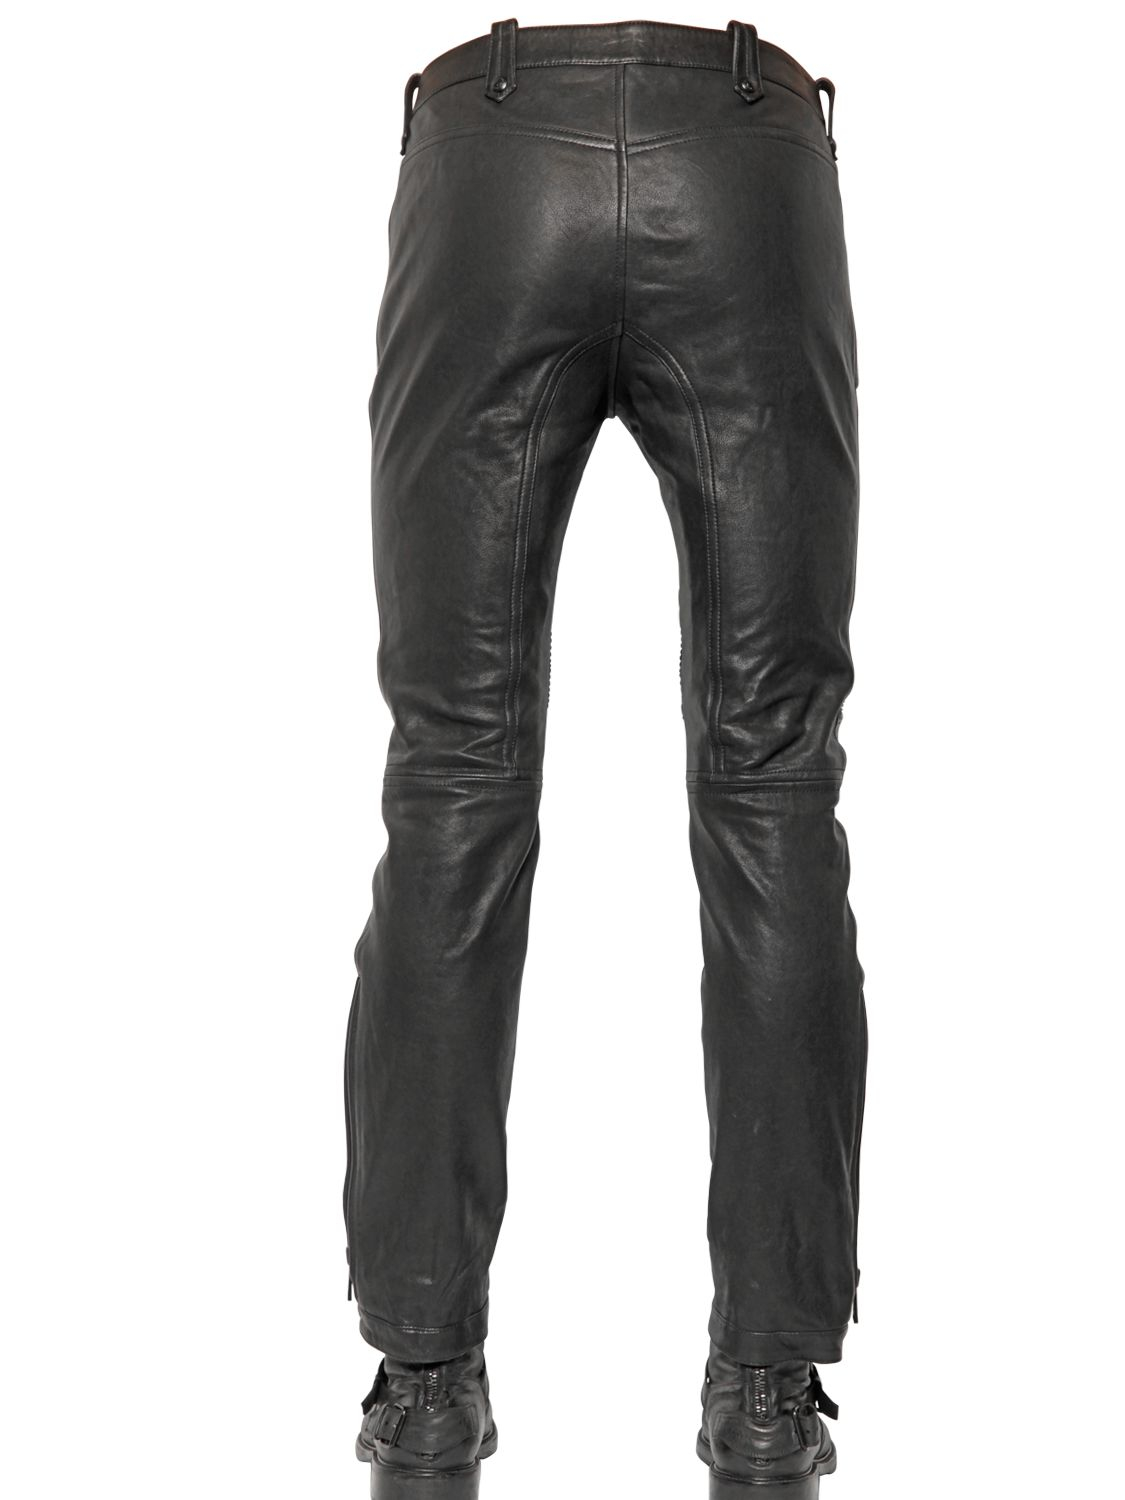 Belstaff Westmore Washed Leather Pants in Black for Men - Lyst